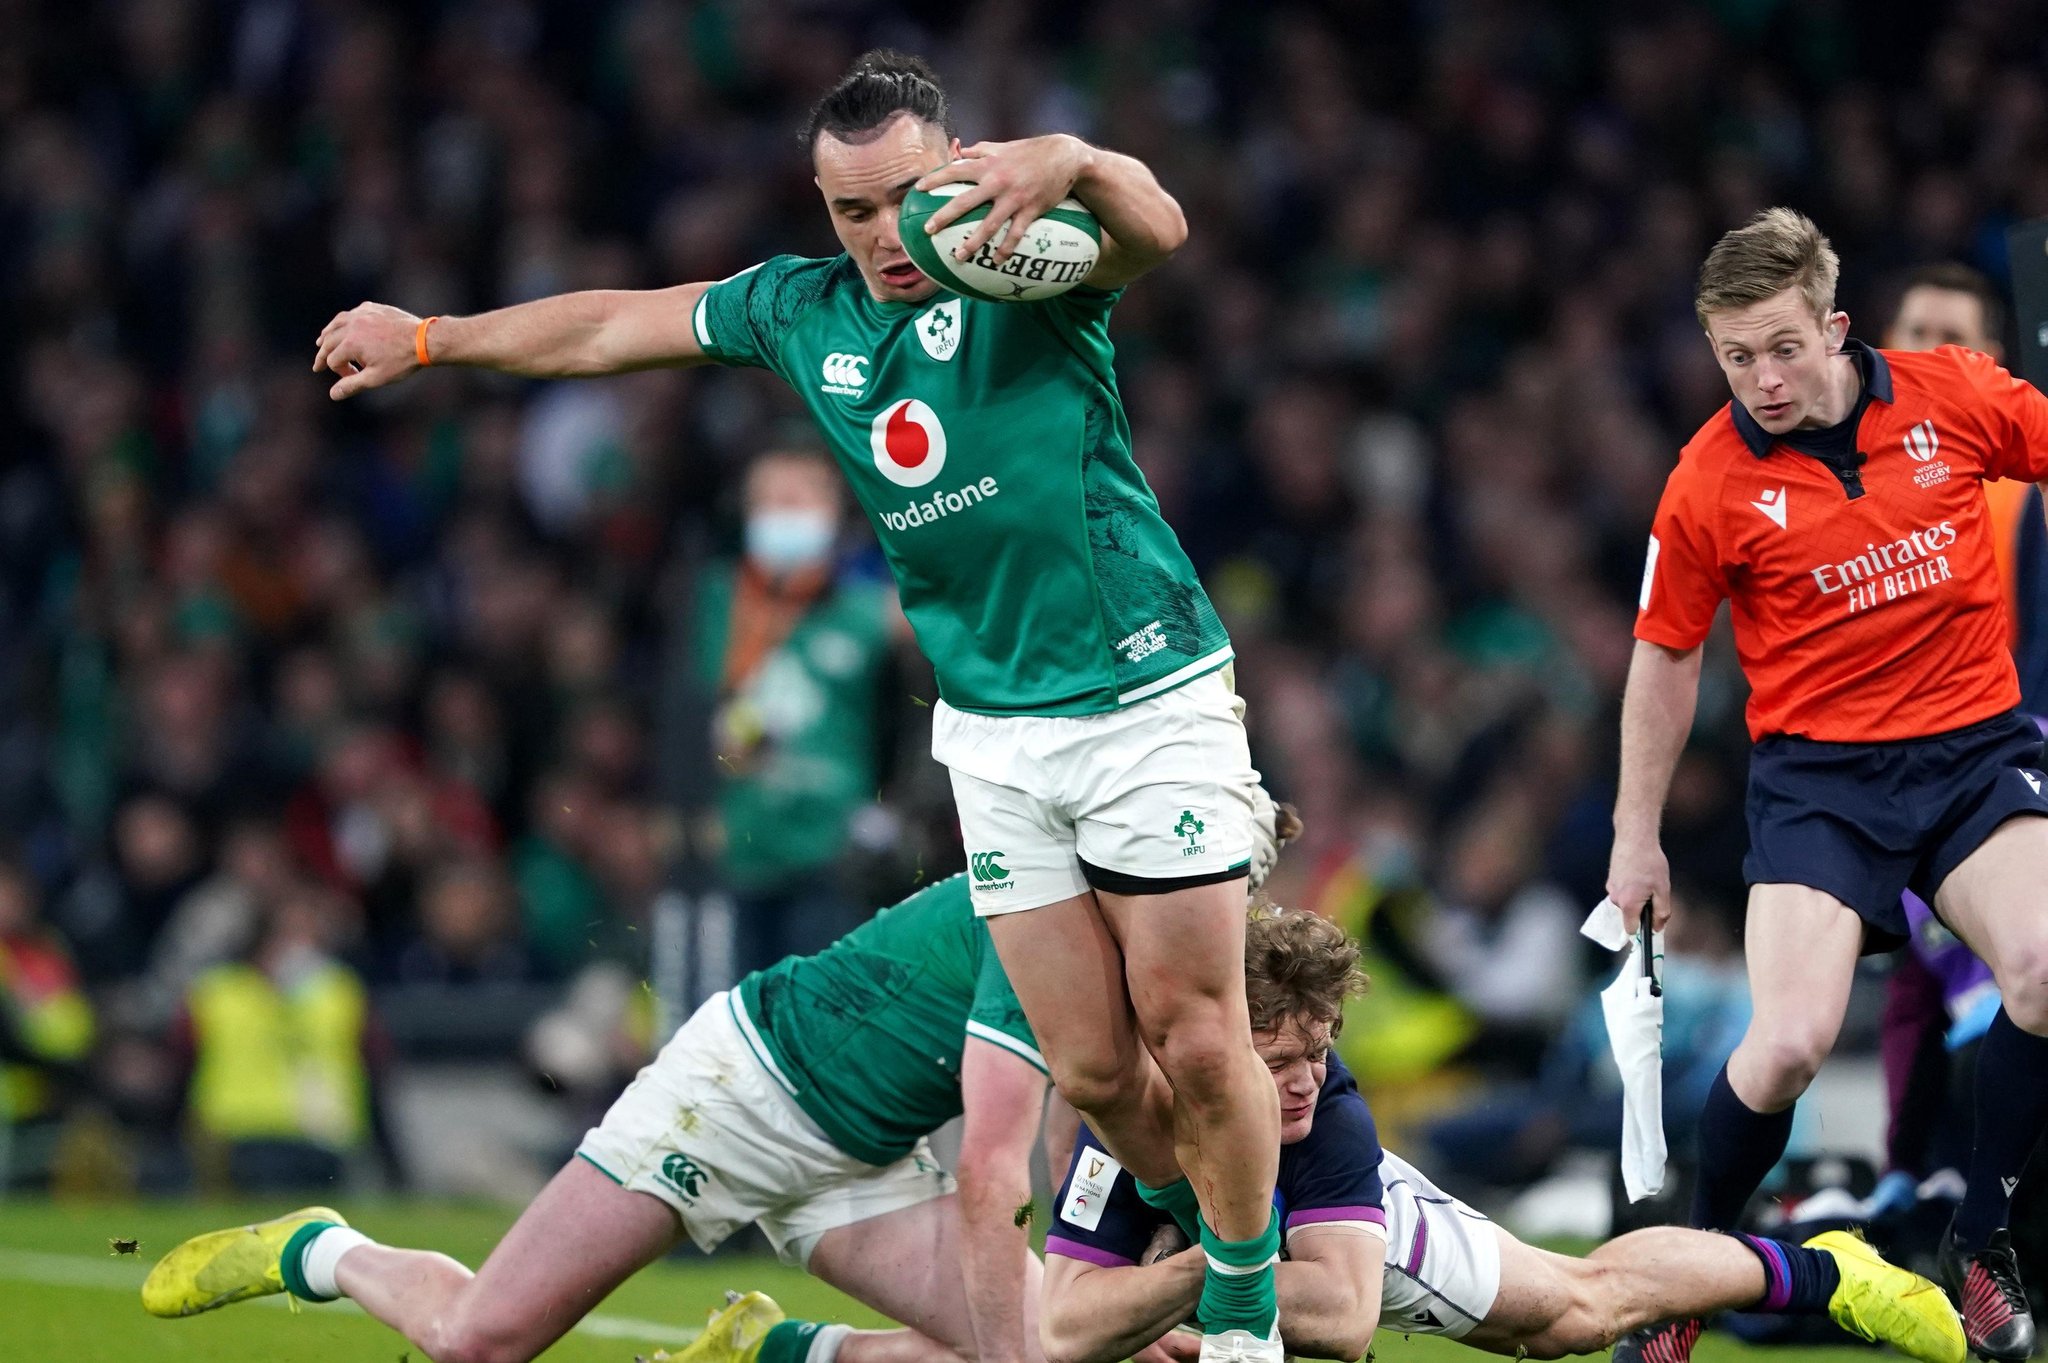 Joy for Ireland rugby team as they claim the Triple Crown